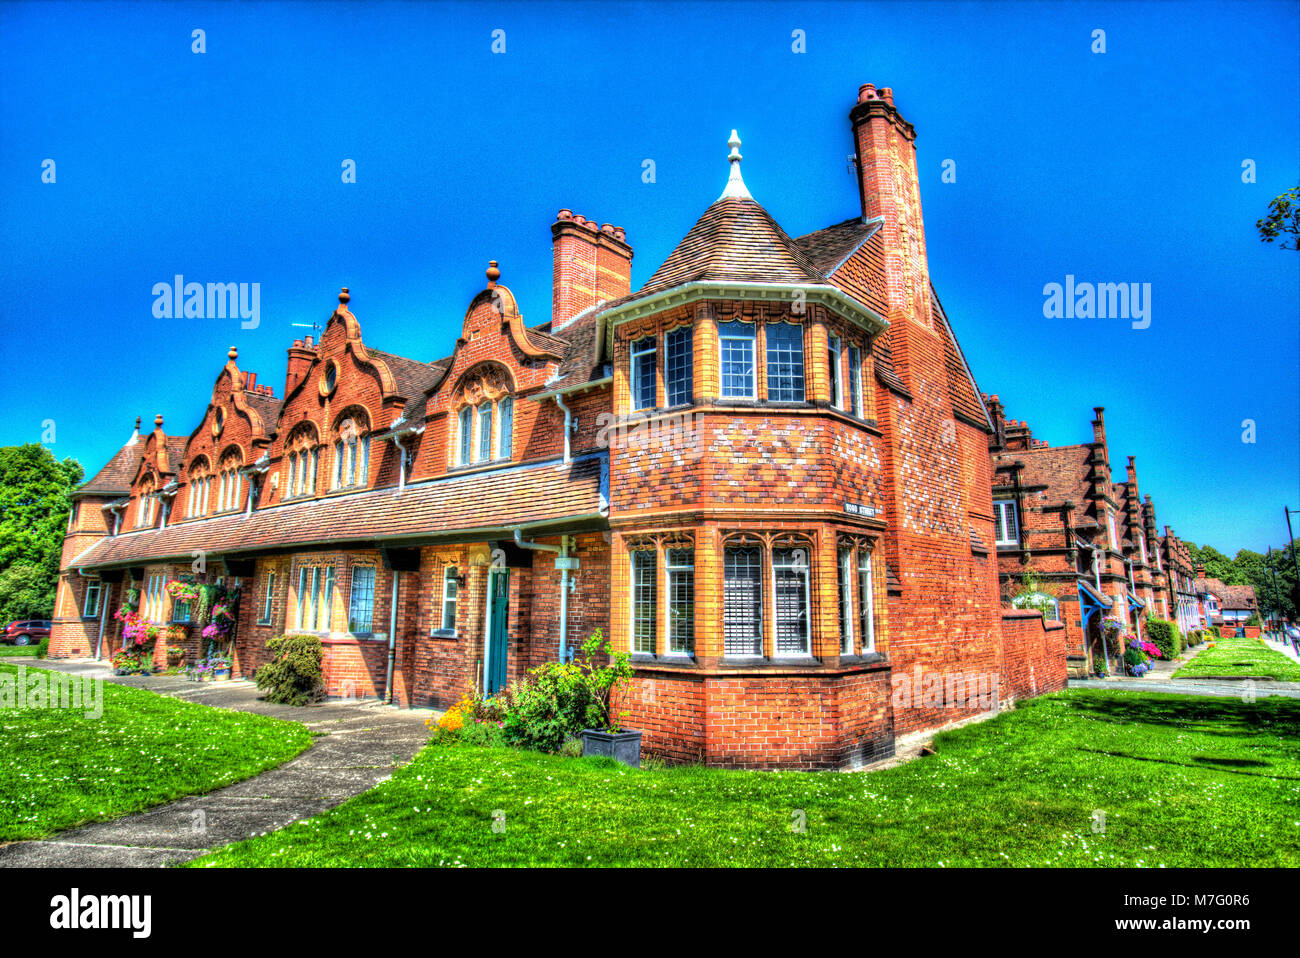 Village of Port Sunlight, England. Artistic view of Port Sunlight cottages on the junction of Bridge Street and Wood Street. Stock Photo